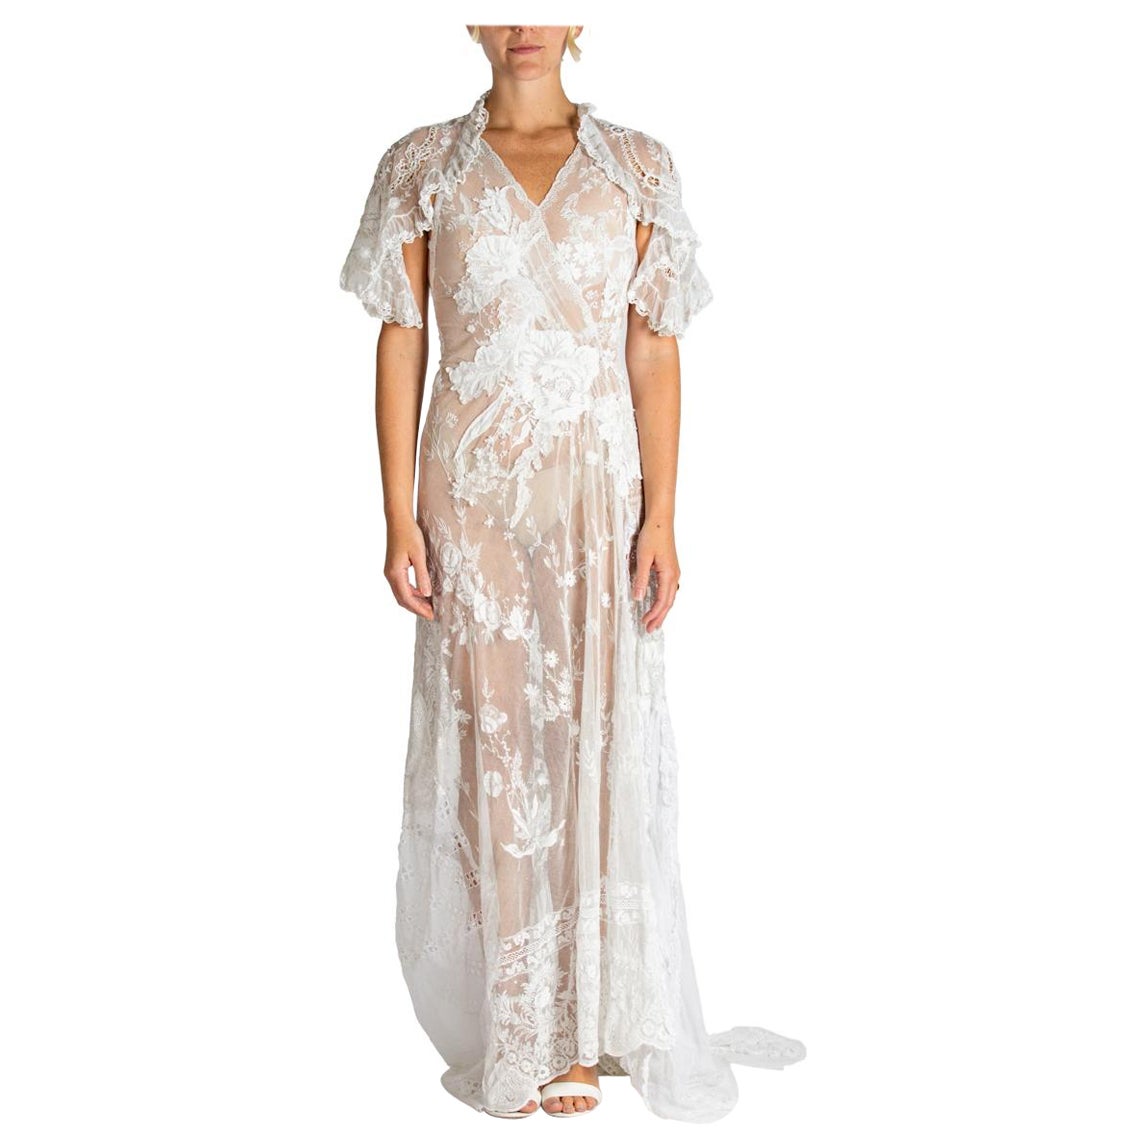 MORPHEW ATELIER White Cotton Embroidered Antique Net Lace Gown With Cut-Out Back For Sale